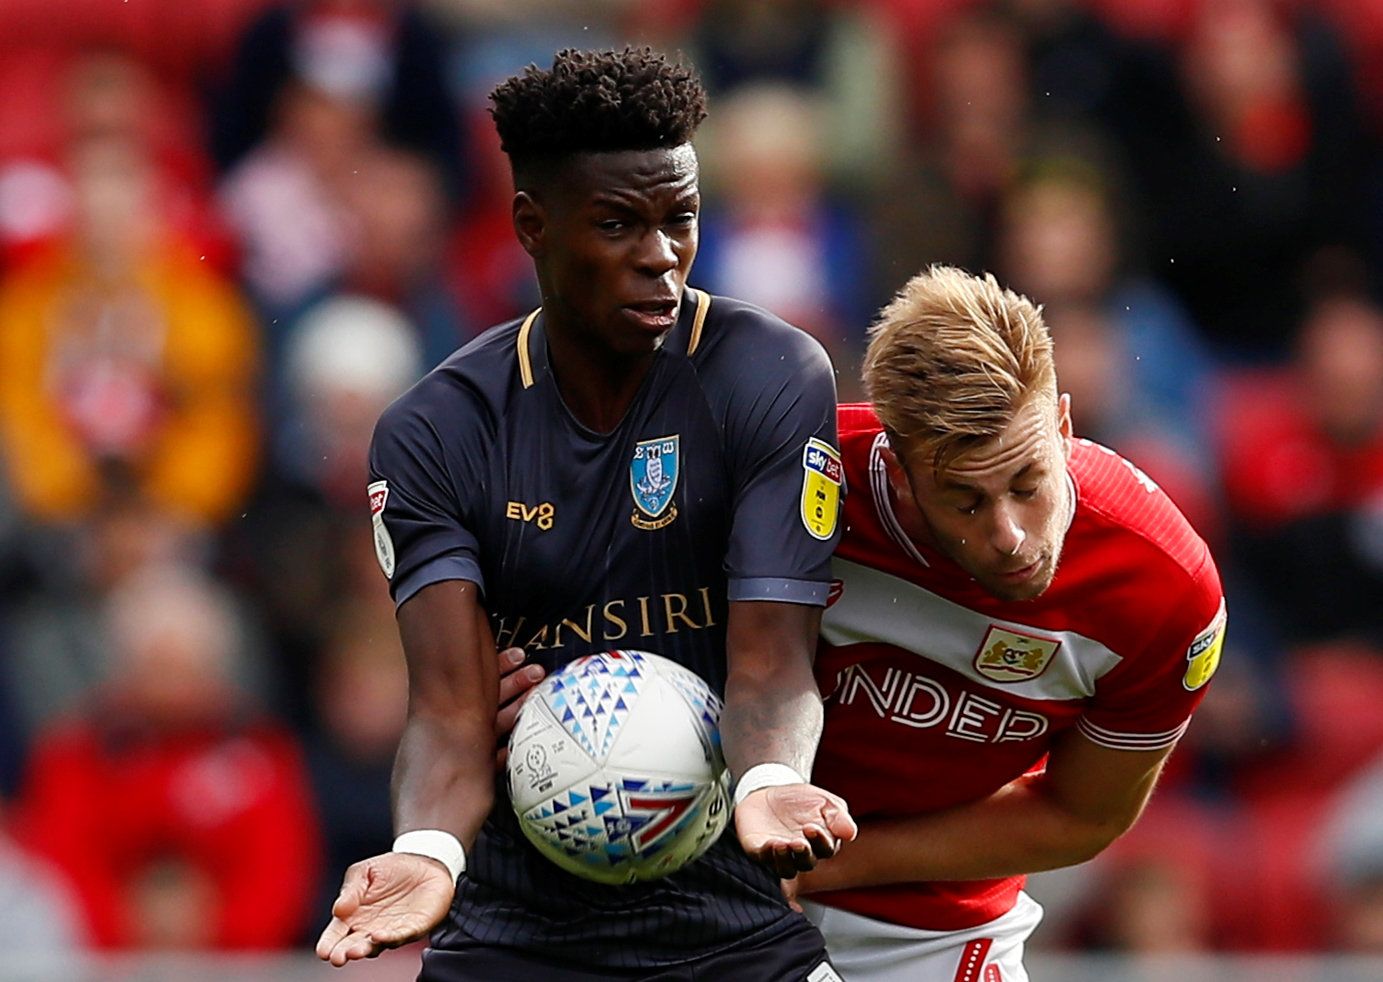 Soccer Football - Championship - Bristol City v Sheffield Wednesday - Ashton Gate Stadium, Bristol, Britain - October 7, 2018   Bristol City's Adam Webster in action with Sheffield Wednesday's Lucas Joao     Action Images/Jason Cairnduff    EDITORIAL USE ONLY. No use with unauthorized audio, video, data, fixture lists, club/league logos or 